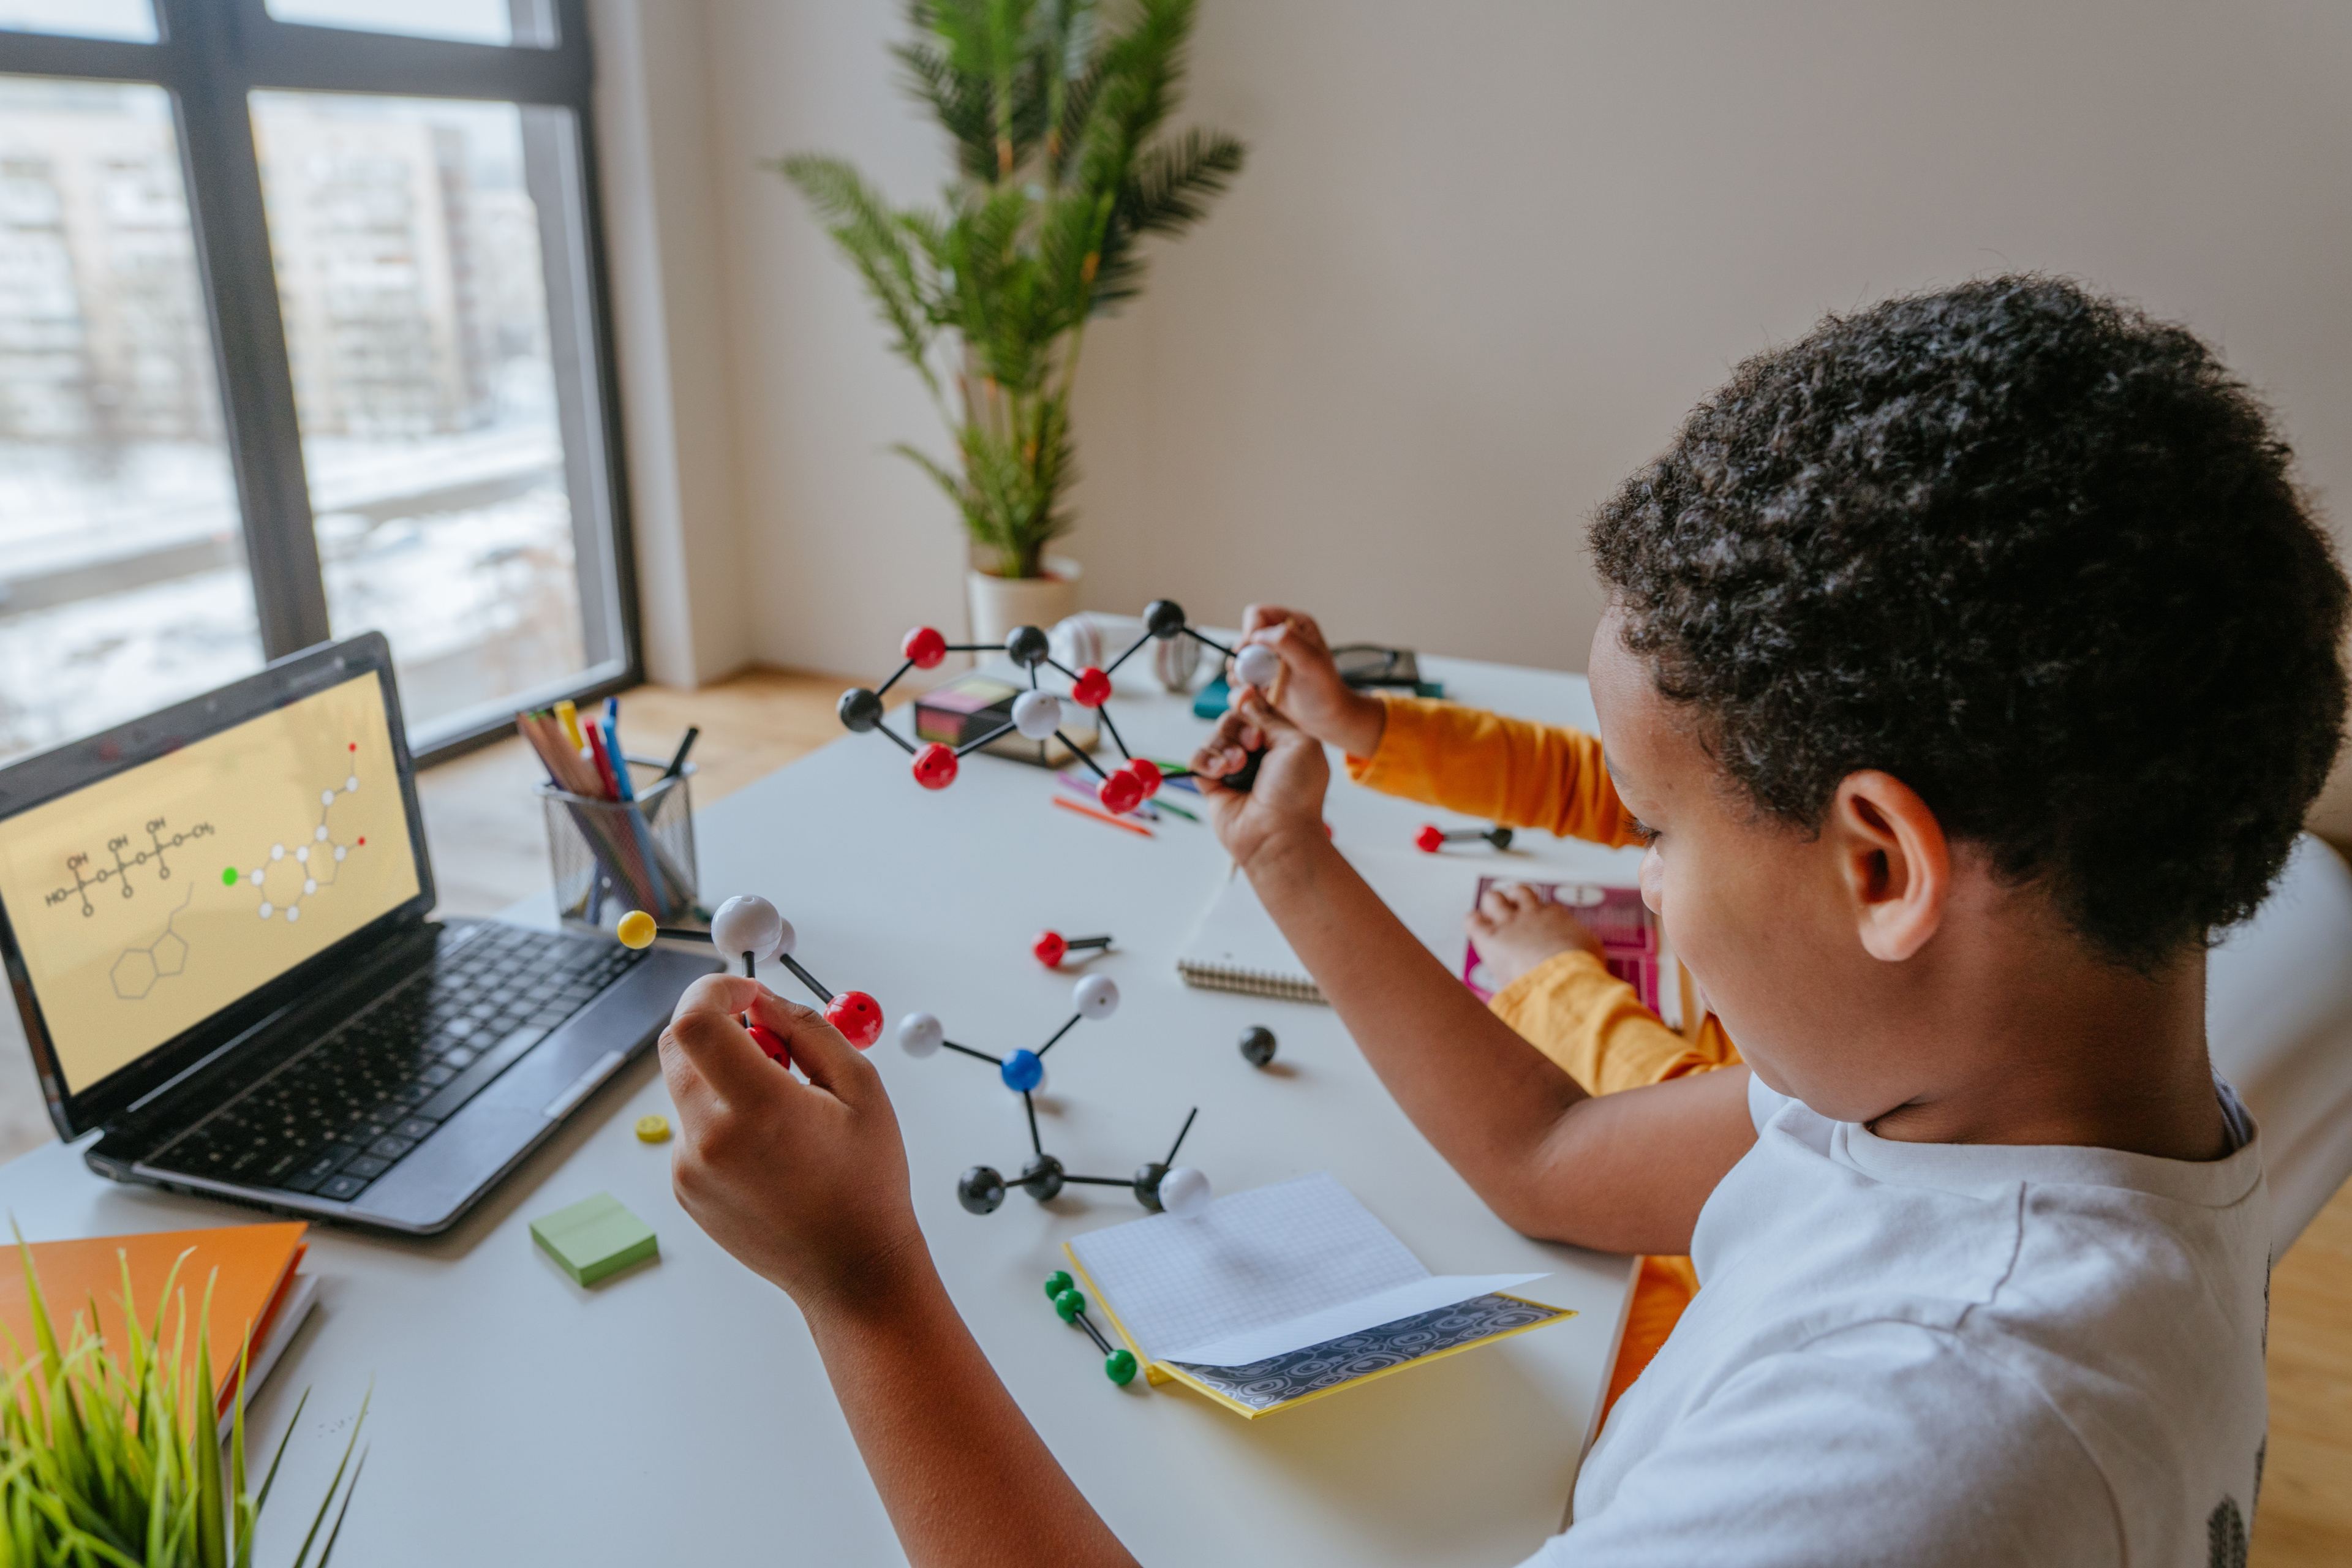  A boy holds molecular bonds while learning about chemistry from a computer